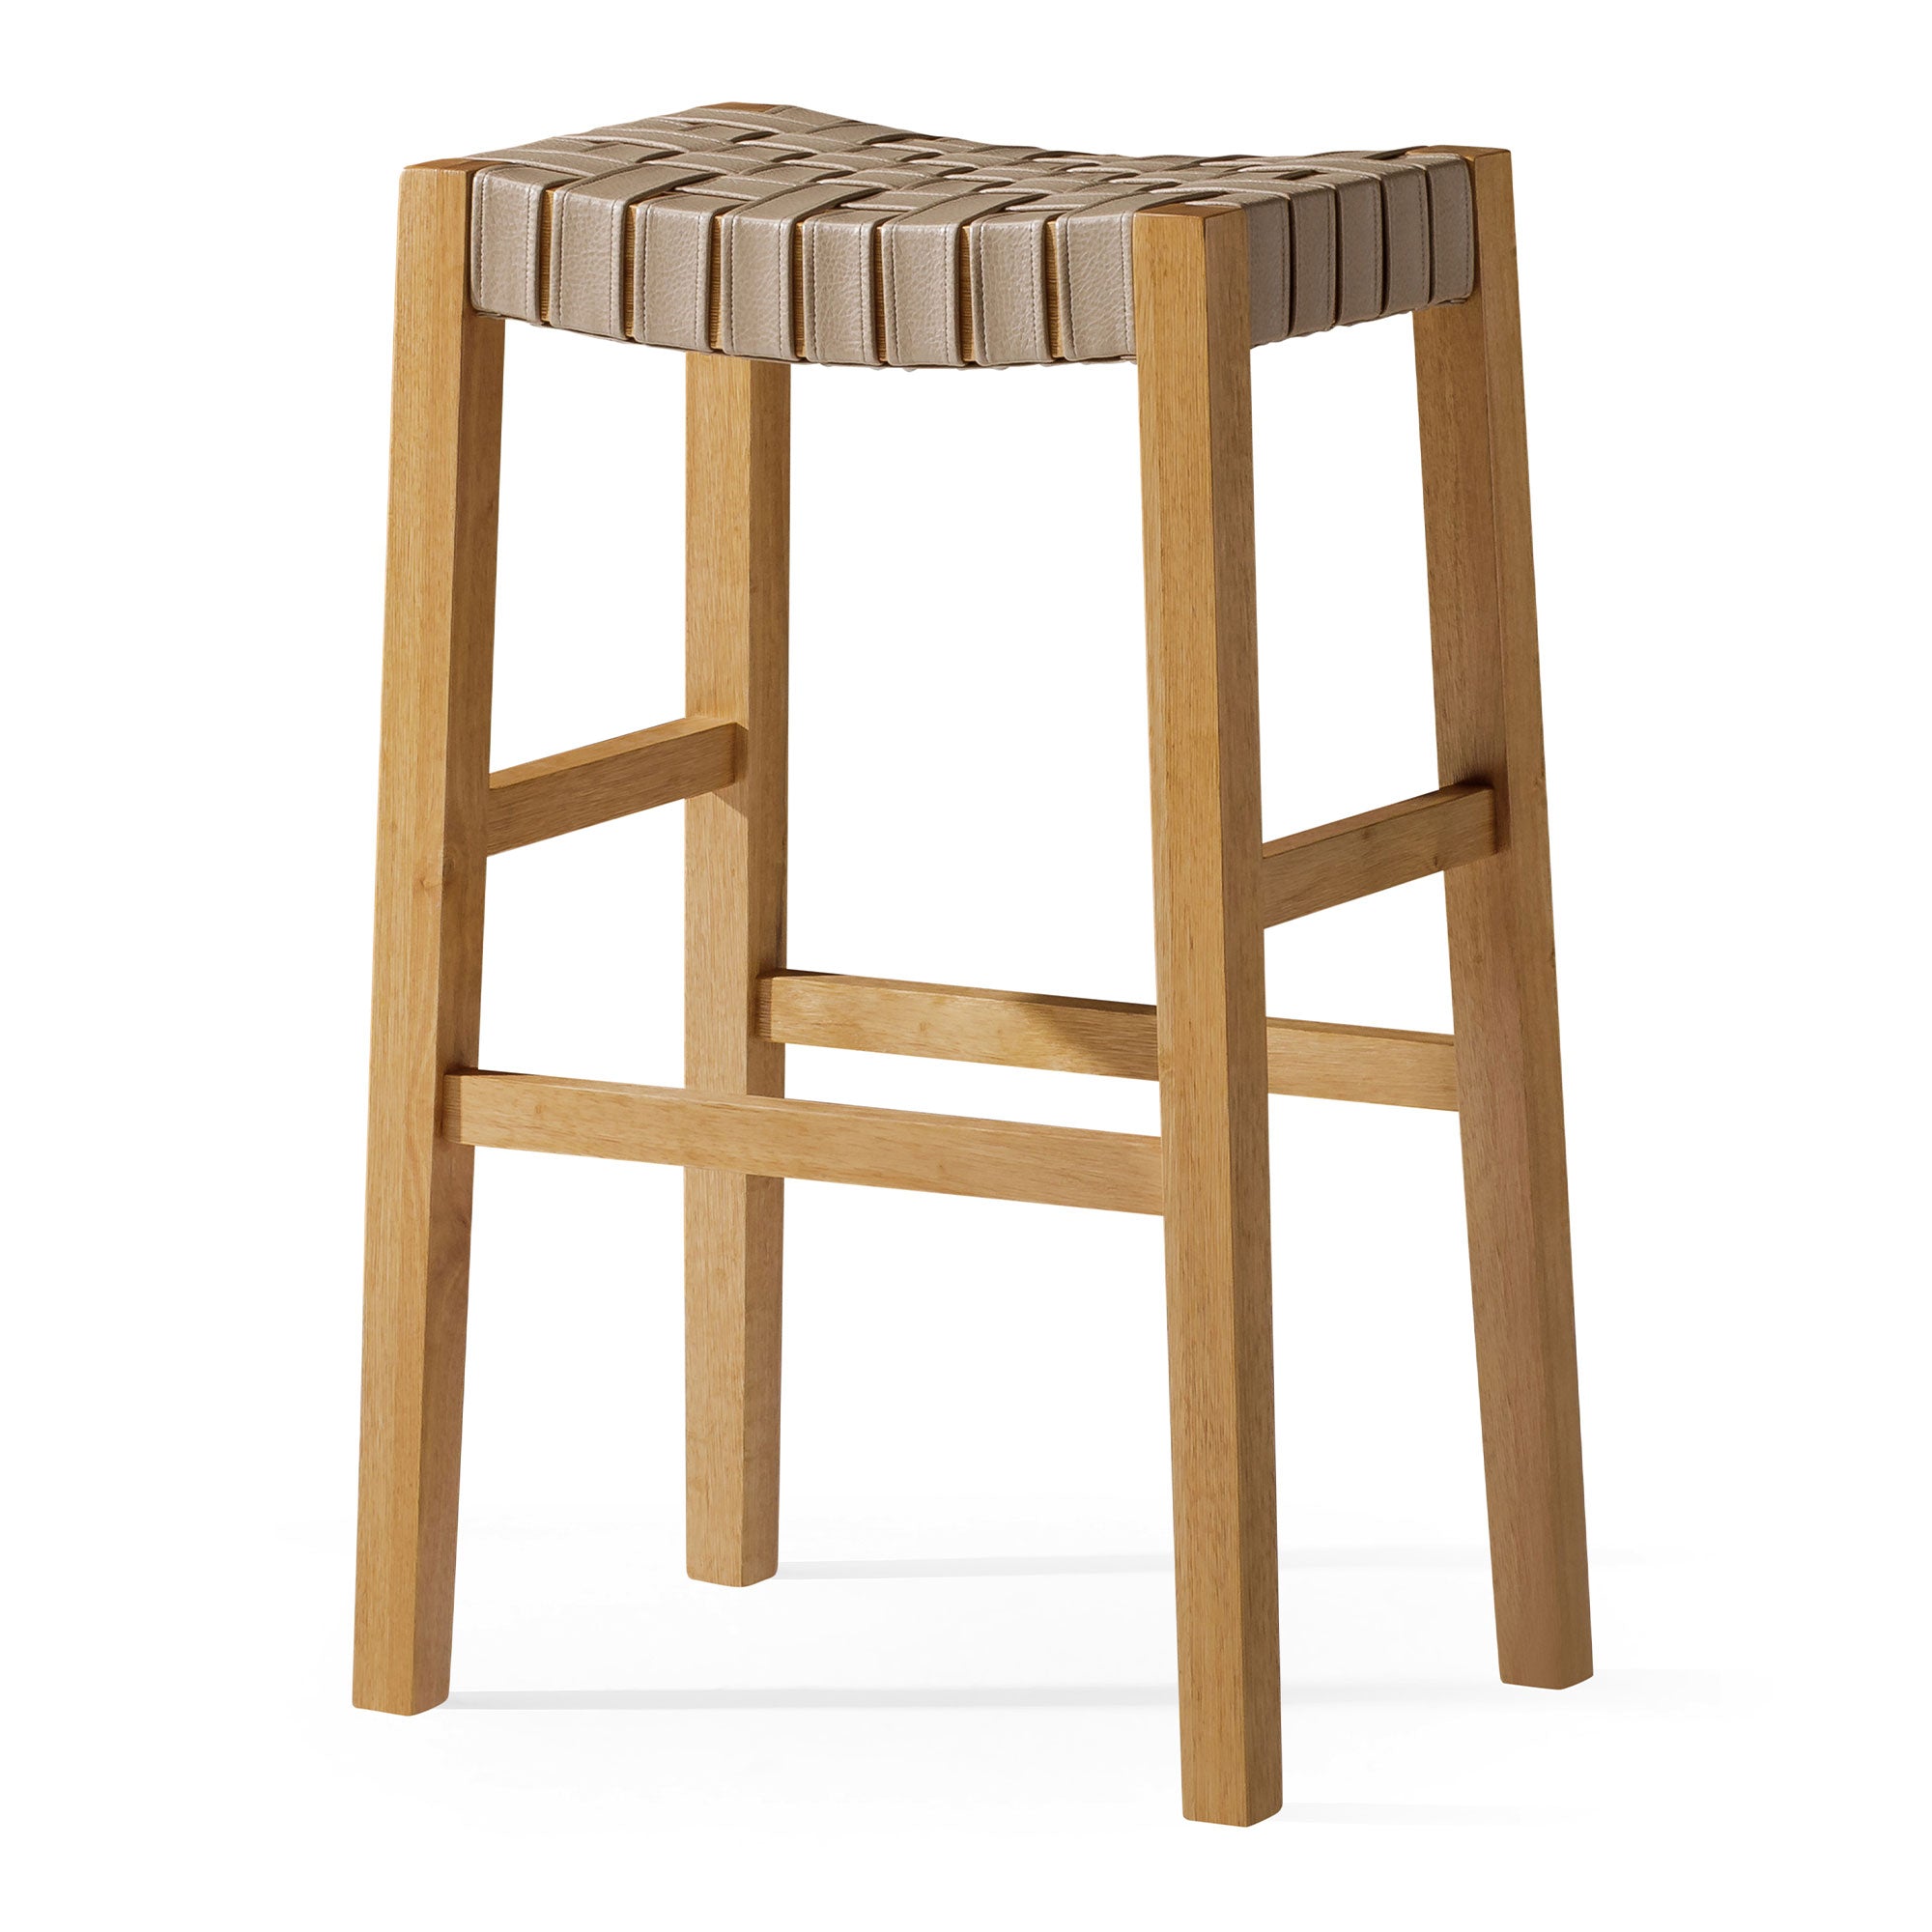 Emerson Bar Stool in Weathered Natural Wood Finish with Avanti Bone Vegan Leather